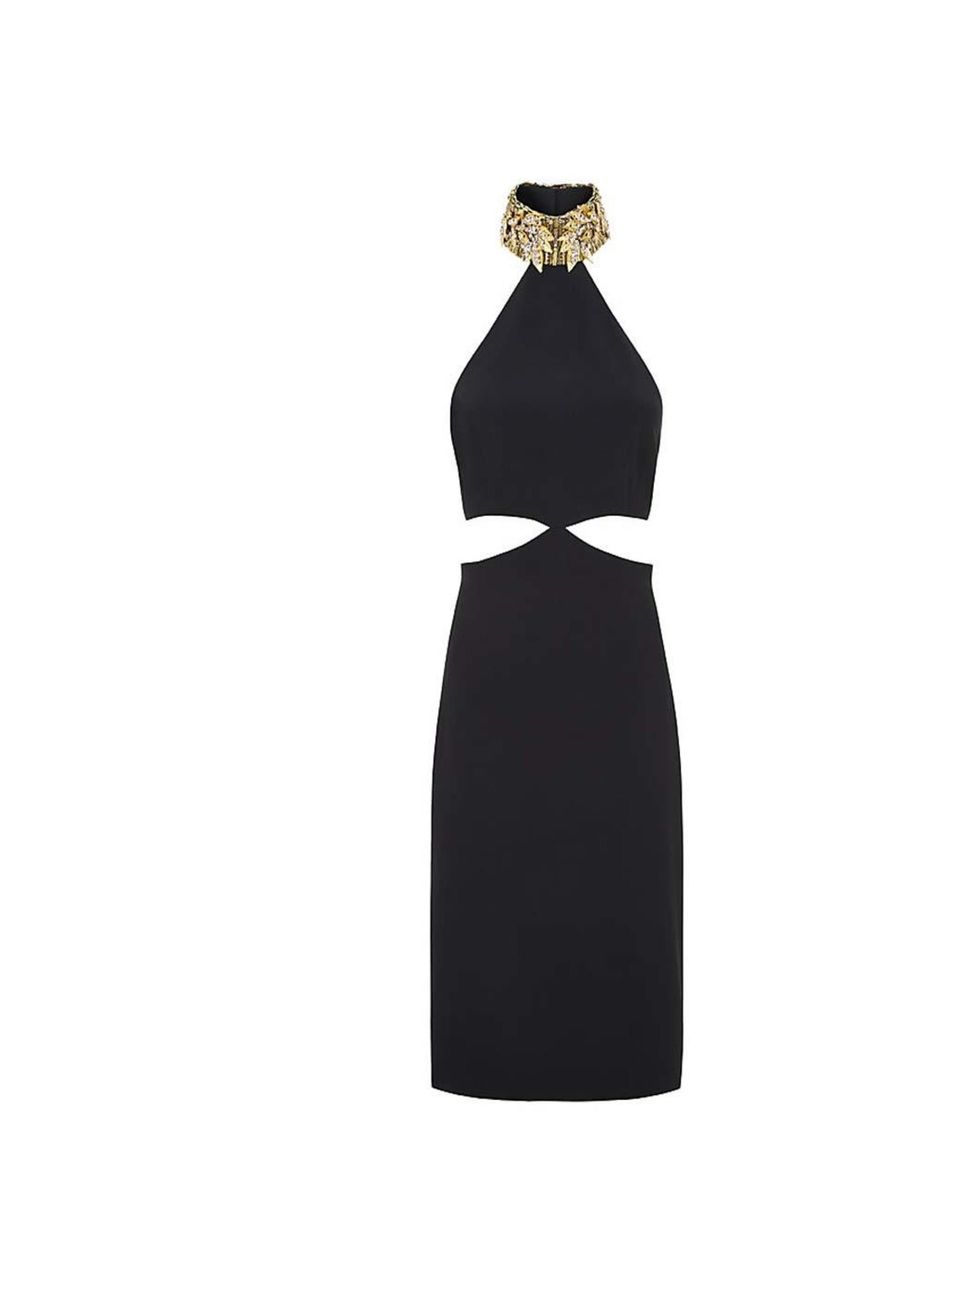 <p>Similar to the black design Kate Hudson wore last year, this Alexander McQueen dress, £2,250, is available at <a href="http://www.harrods.com/product/jewel-collar-cut-out-dress/alexander-mcqueen/000000000003619151?cat1=bc-alexander-mcqueen&amp;cat2=bc-